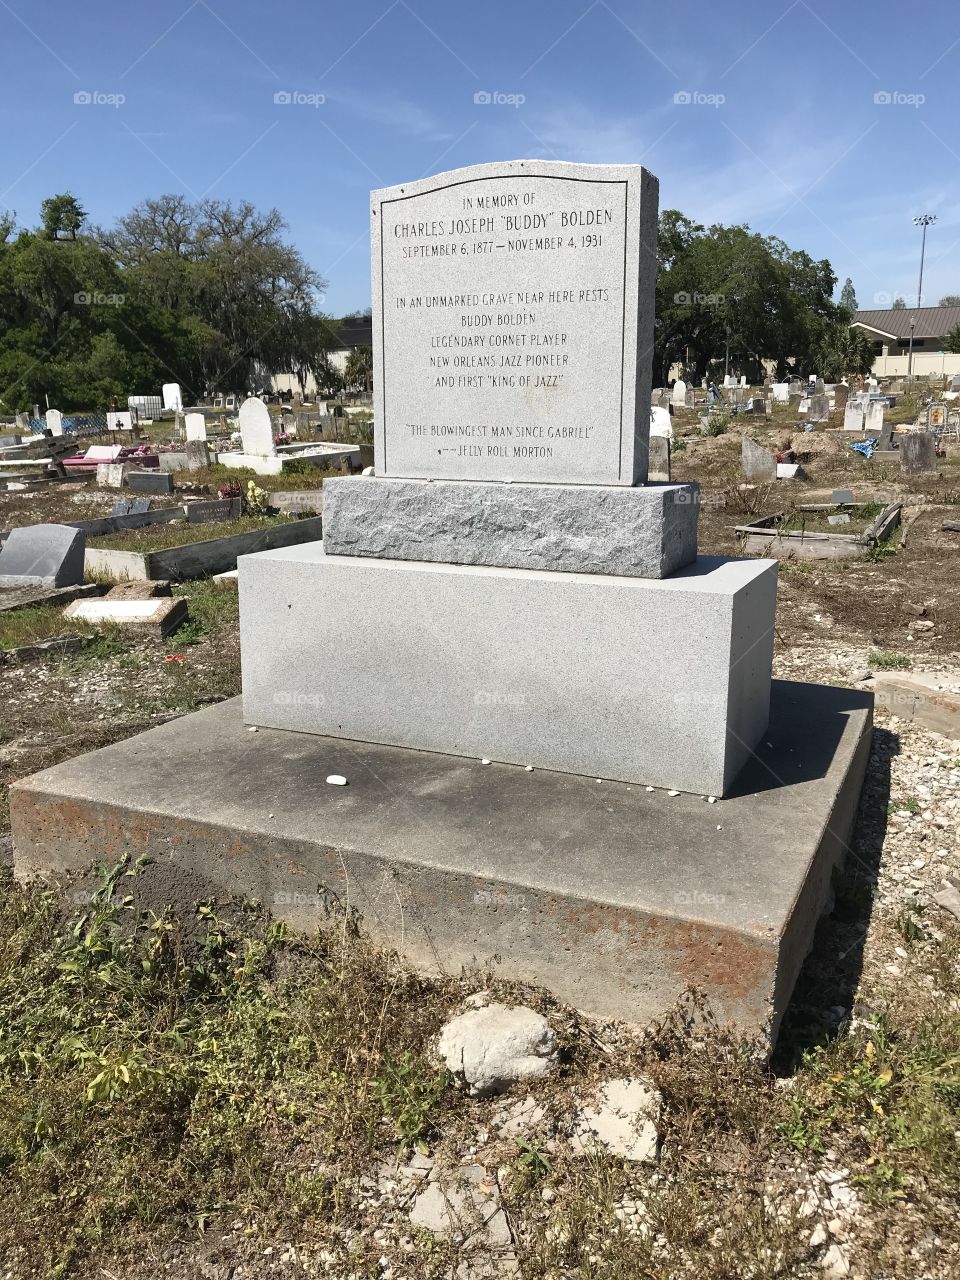 Jazz pioneer Buddy Bolden’s gravestone. Holt Cemetery, New Orleans Louisiana. Holt Cemetery is the historically “black cemetery”. The unmarked, shallow graves & makeshift headstones at Holt Cemetery contrast with the elaborate mausoleums for whites